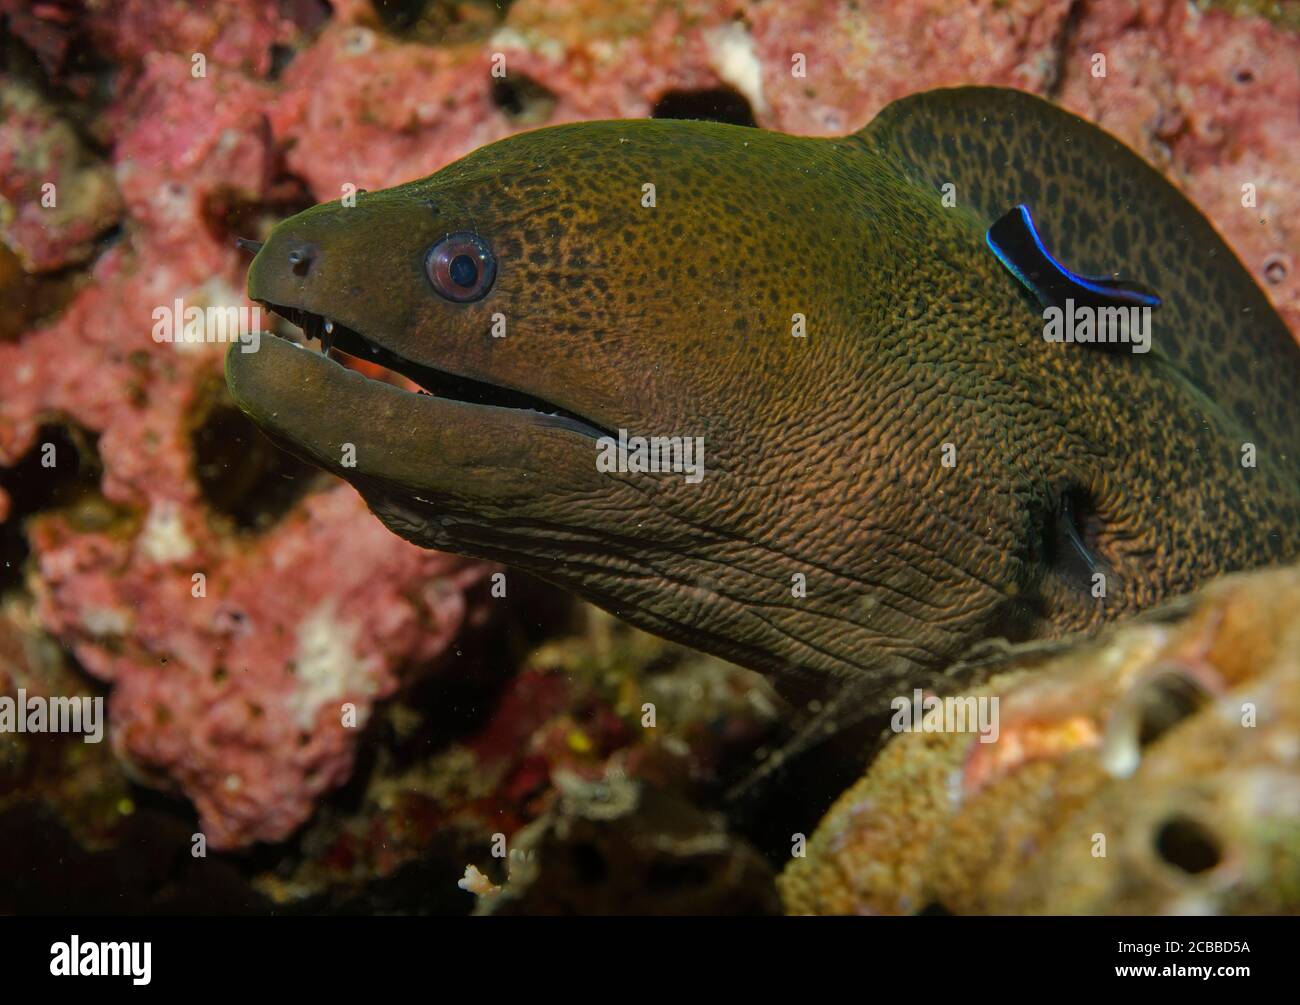 Giant Moray eel, Gymnothorax javanicus, being cleaned by a Bluestriped Cleaner Wrasses, Labroides dimidiatus, on coral reef, Tulamben, Bali, indonesia Stock Photo